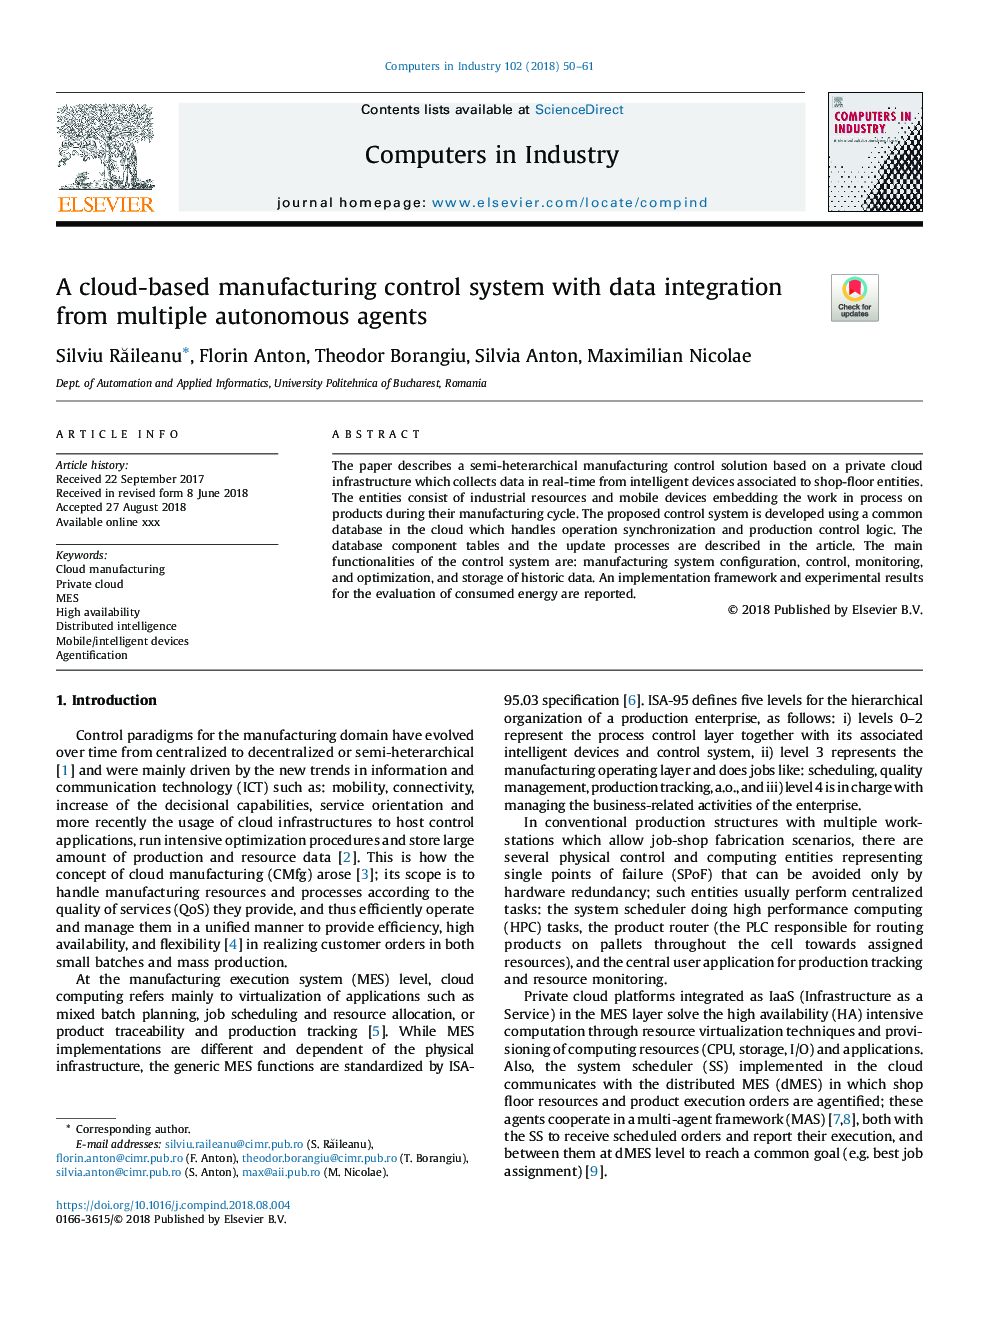 A cloud-based manufacturing control system with data integration from multiple autonomous agents